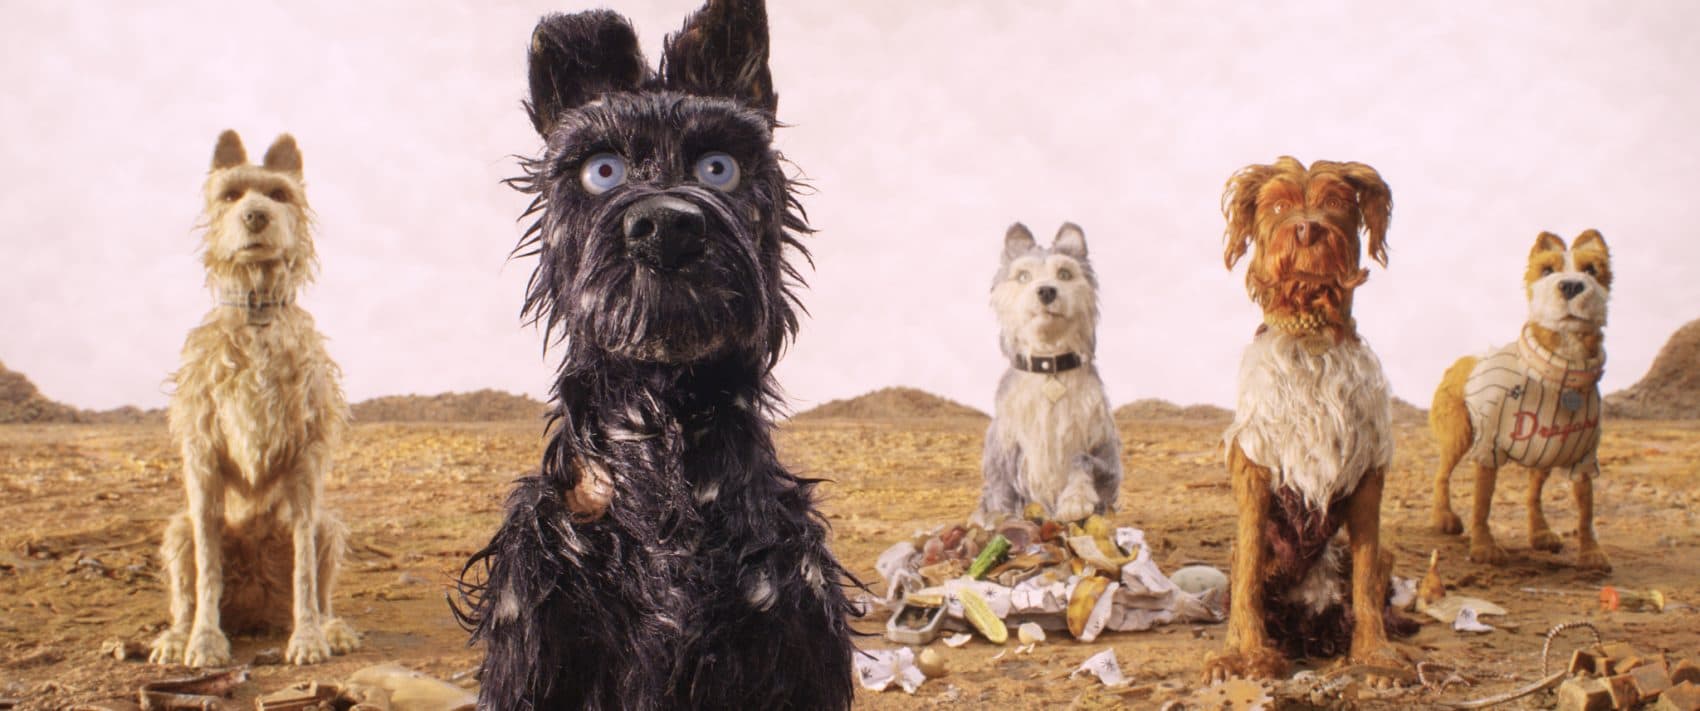 With Stunning Visuals, Wes Anderson’s 'Isle Of Dogs' Delivers A Melancholy Strain Of Whimsy